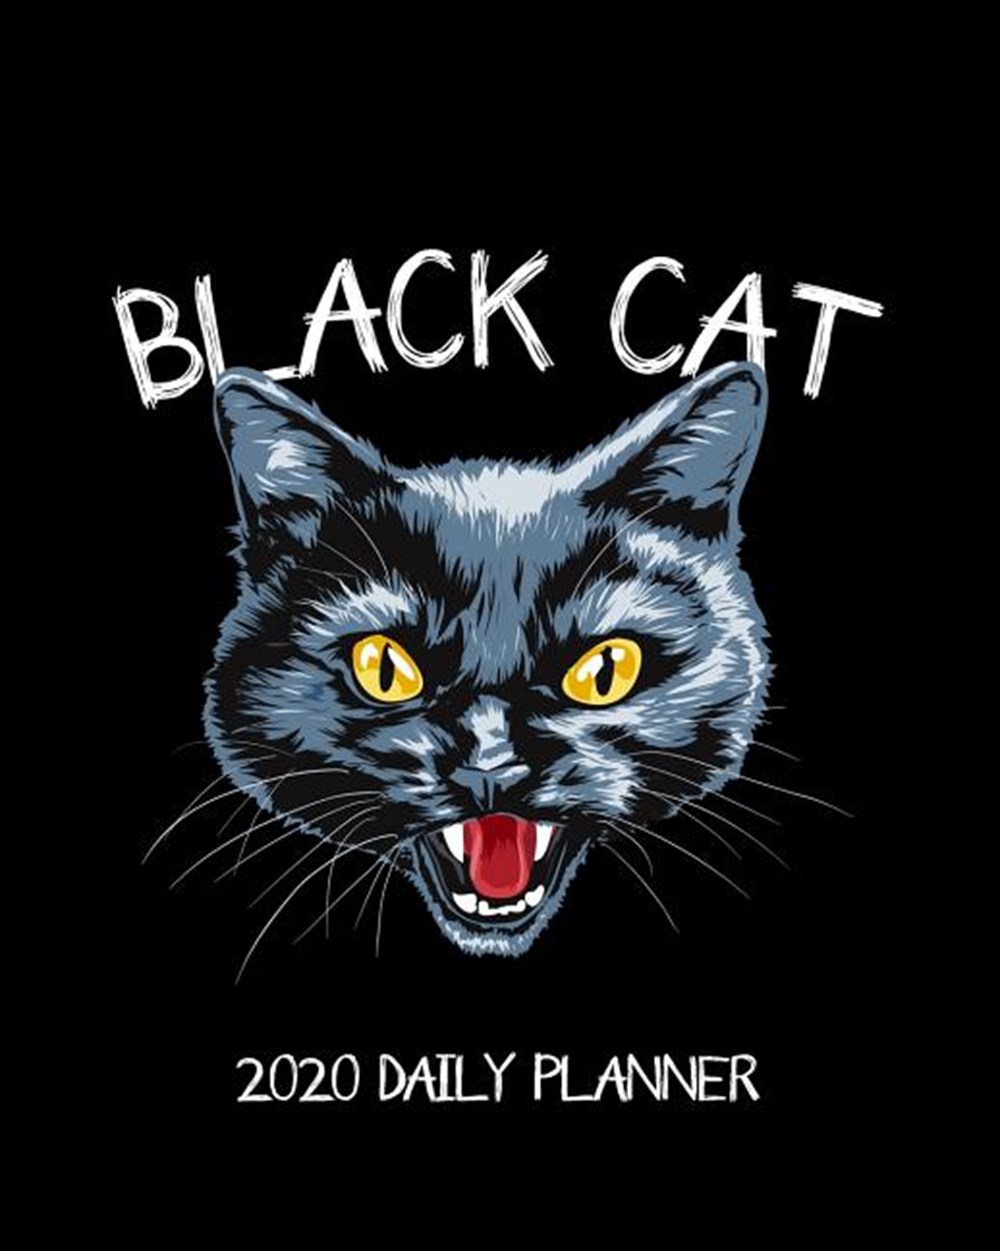 Black Cat - 2020 Daily Planner Crazy Cat Vintage Design - One Year - 365 Day Full Page a Day Schedul